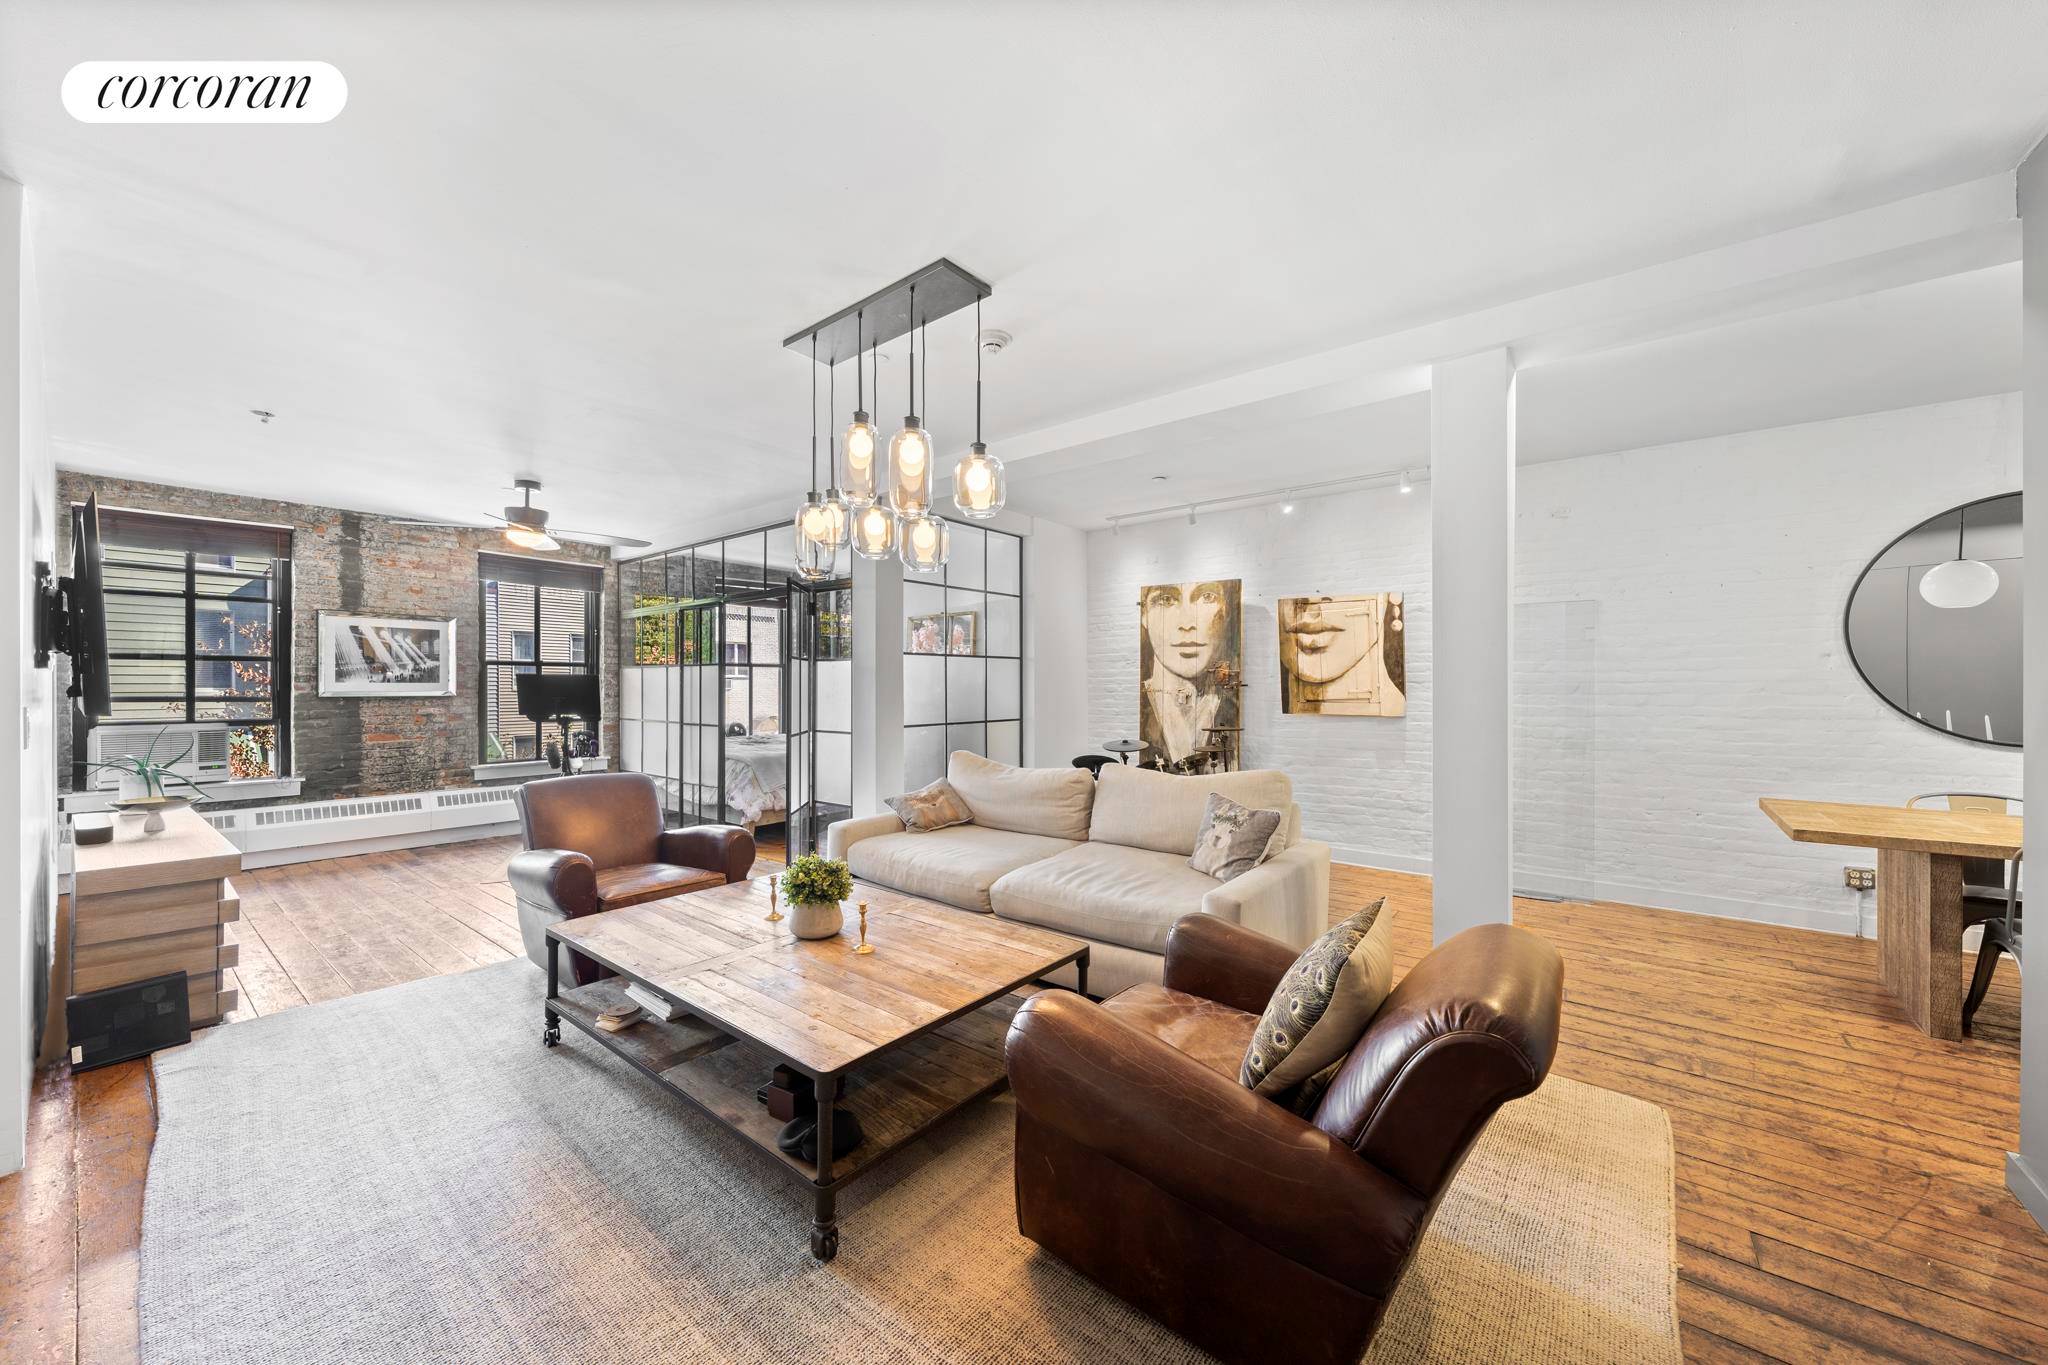 At the meeting of South Slope and Greenwood Heights is an apartment unlike the typical fair found in either neighborhood a SoHo style two bed, two bath loft.